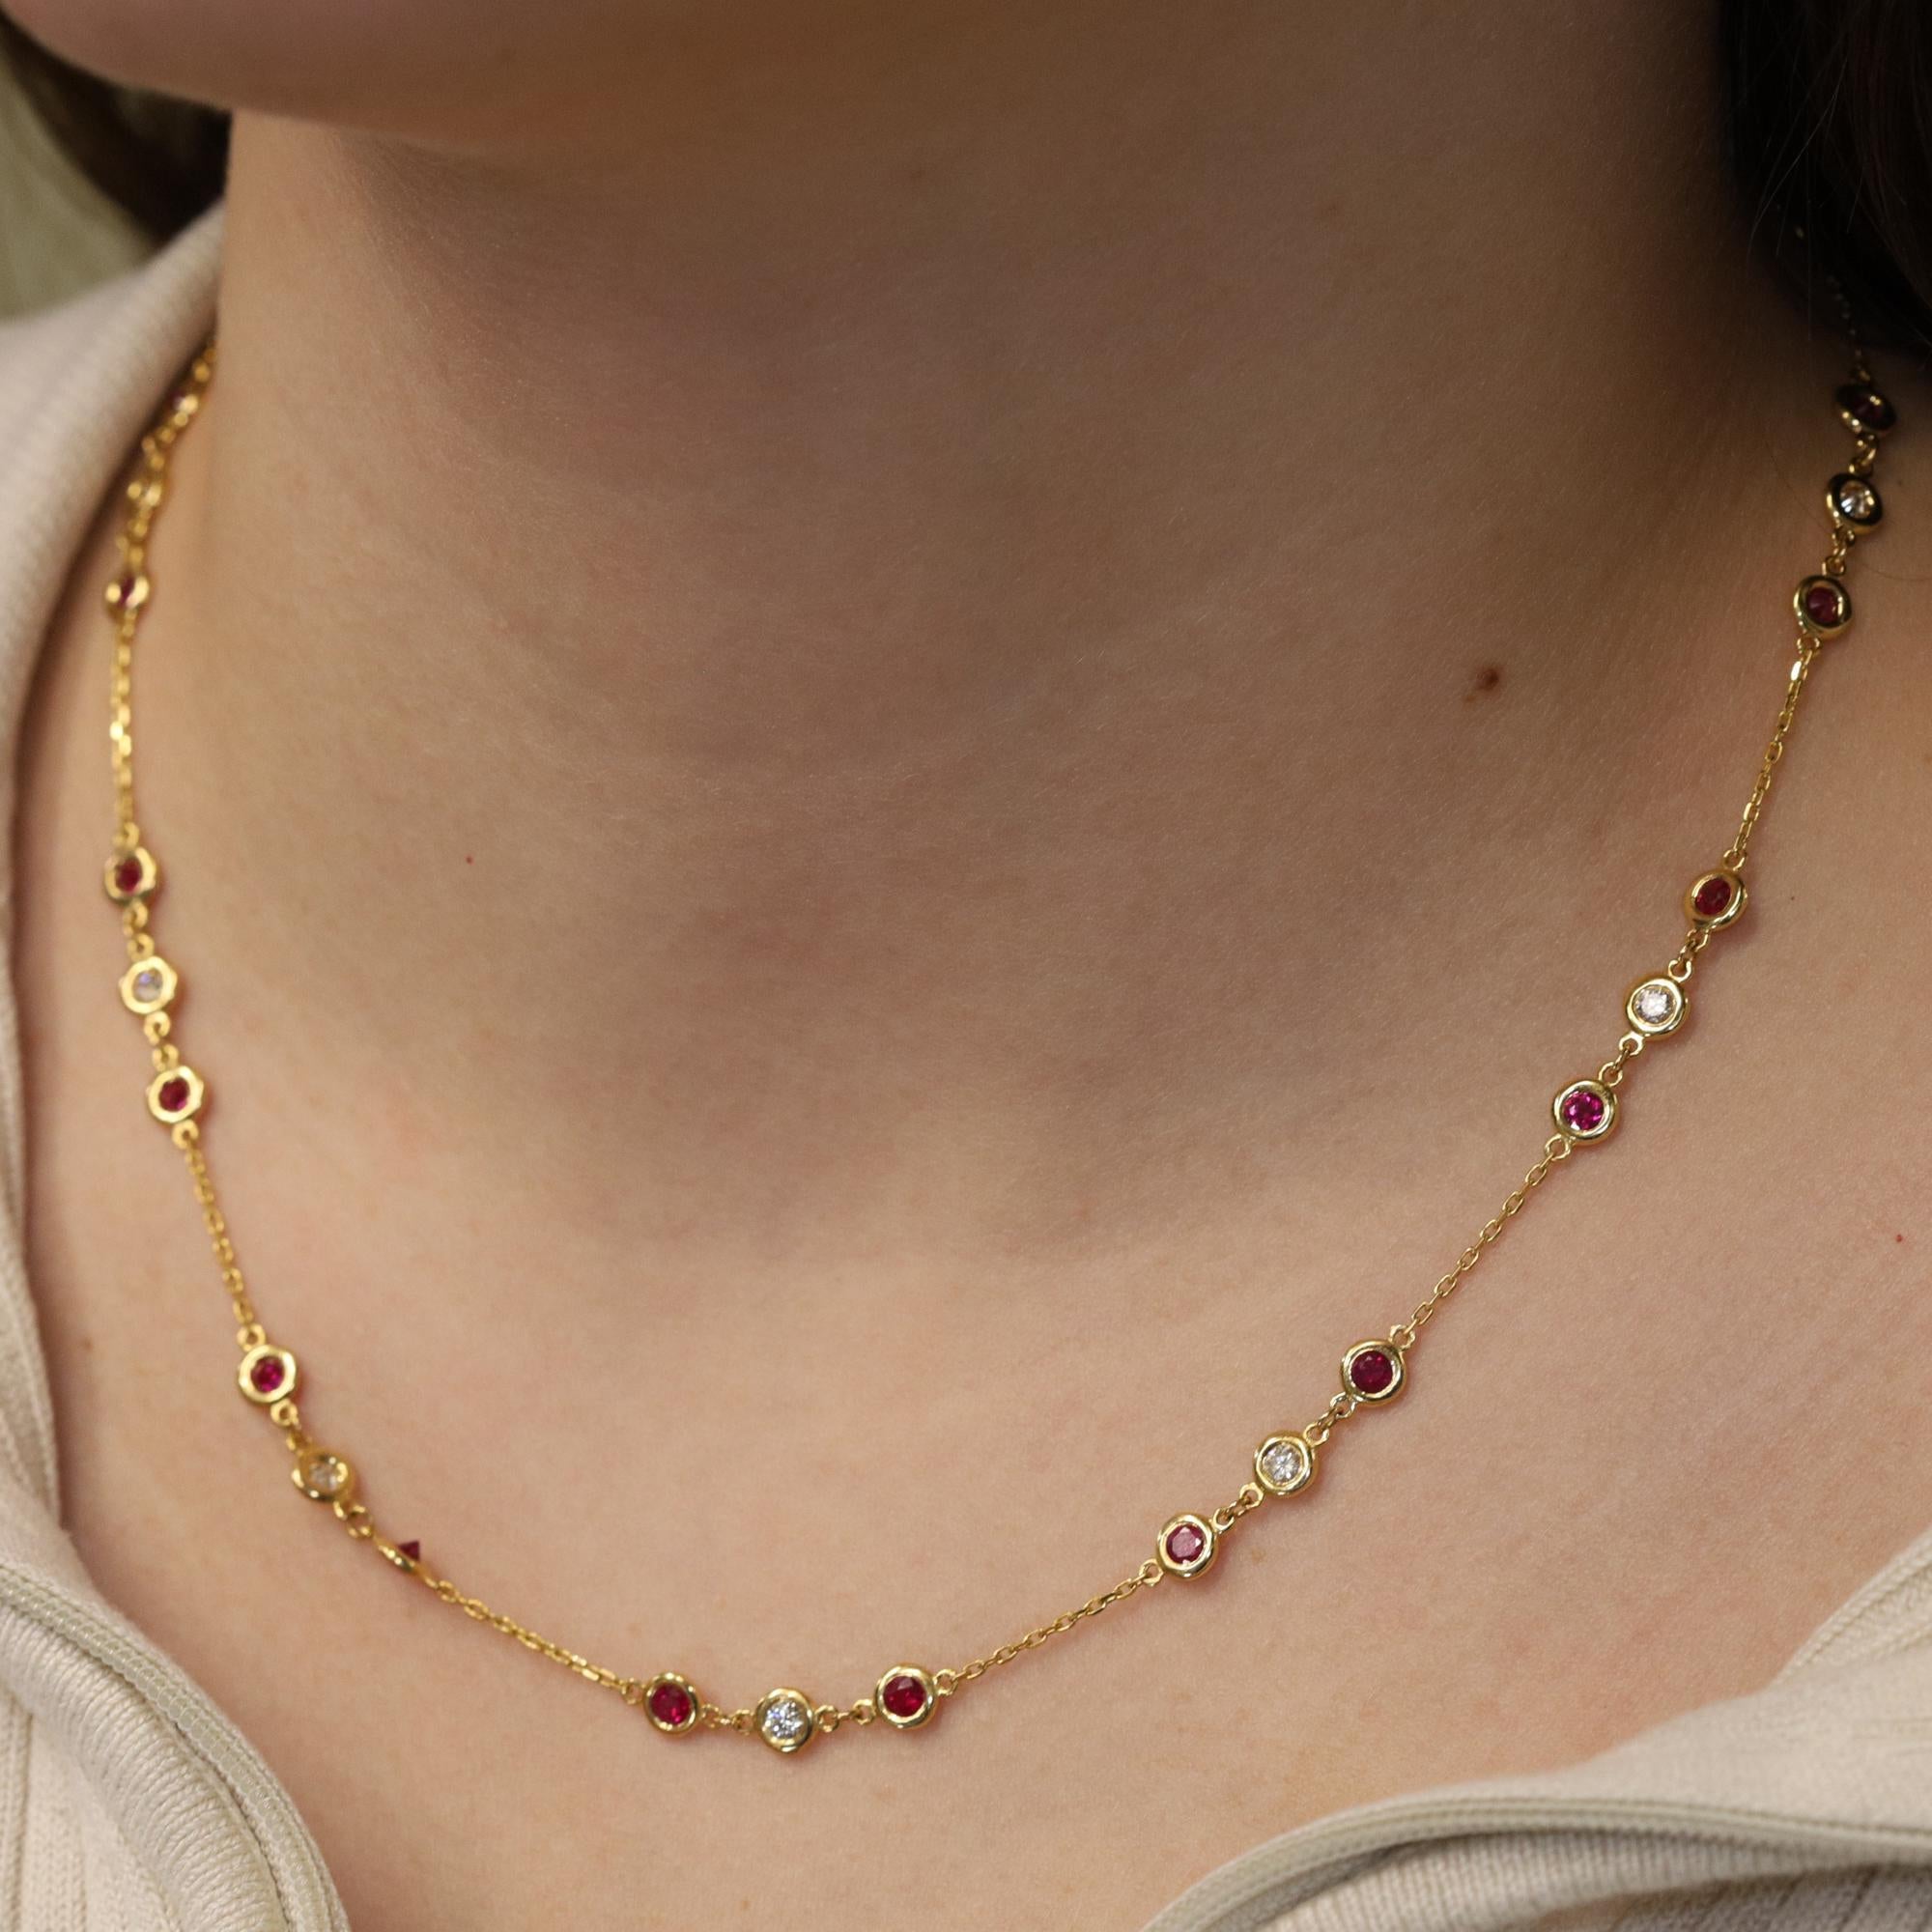 Bezel set stations of richly hued rubies and dazzling round cut diamonds enliven this shimmering 14k yellow gold necklace. Rubies total weight: 2.86ct. Diamond total weight: 0.95ct. Chain length: 18 inches. Comes with a presentable gift box and